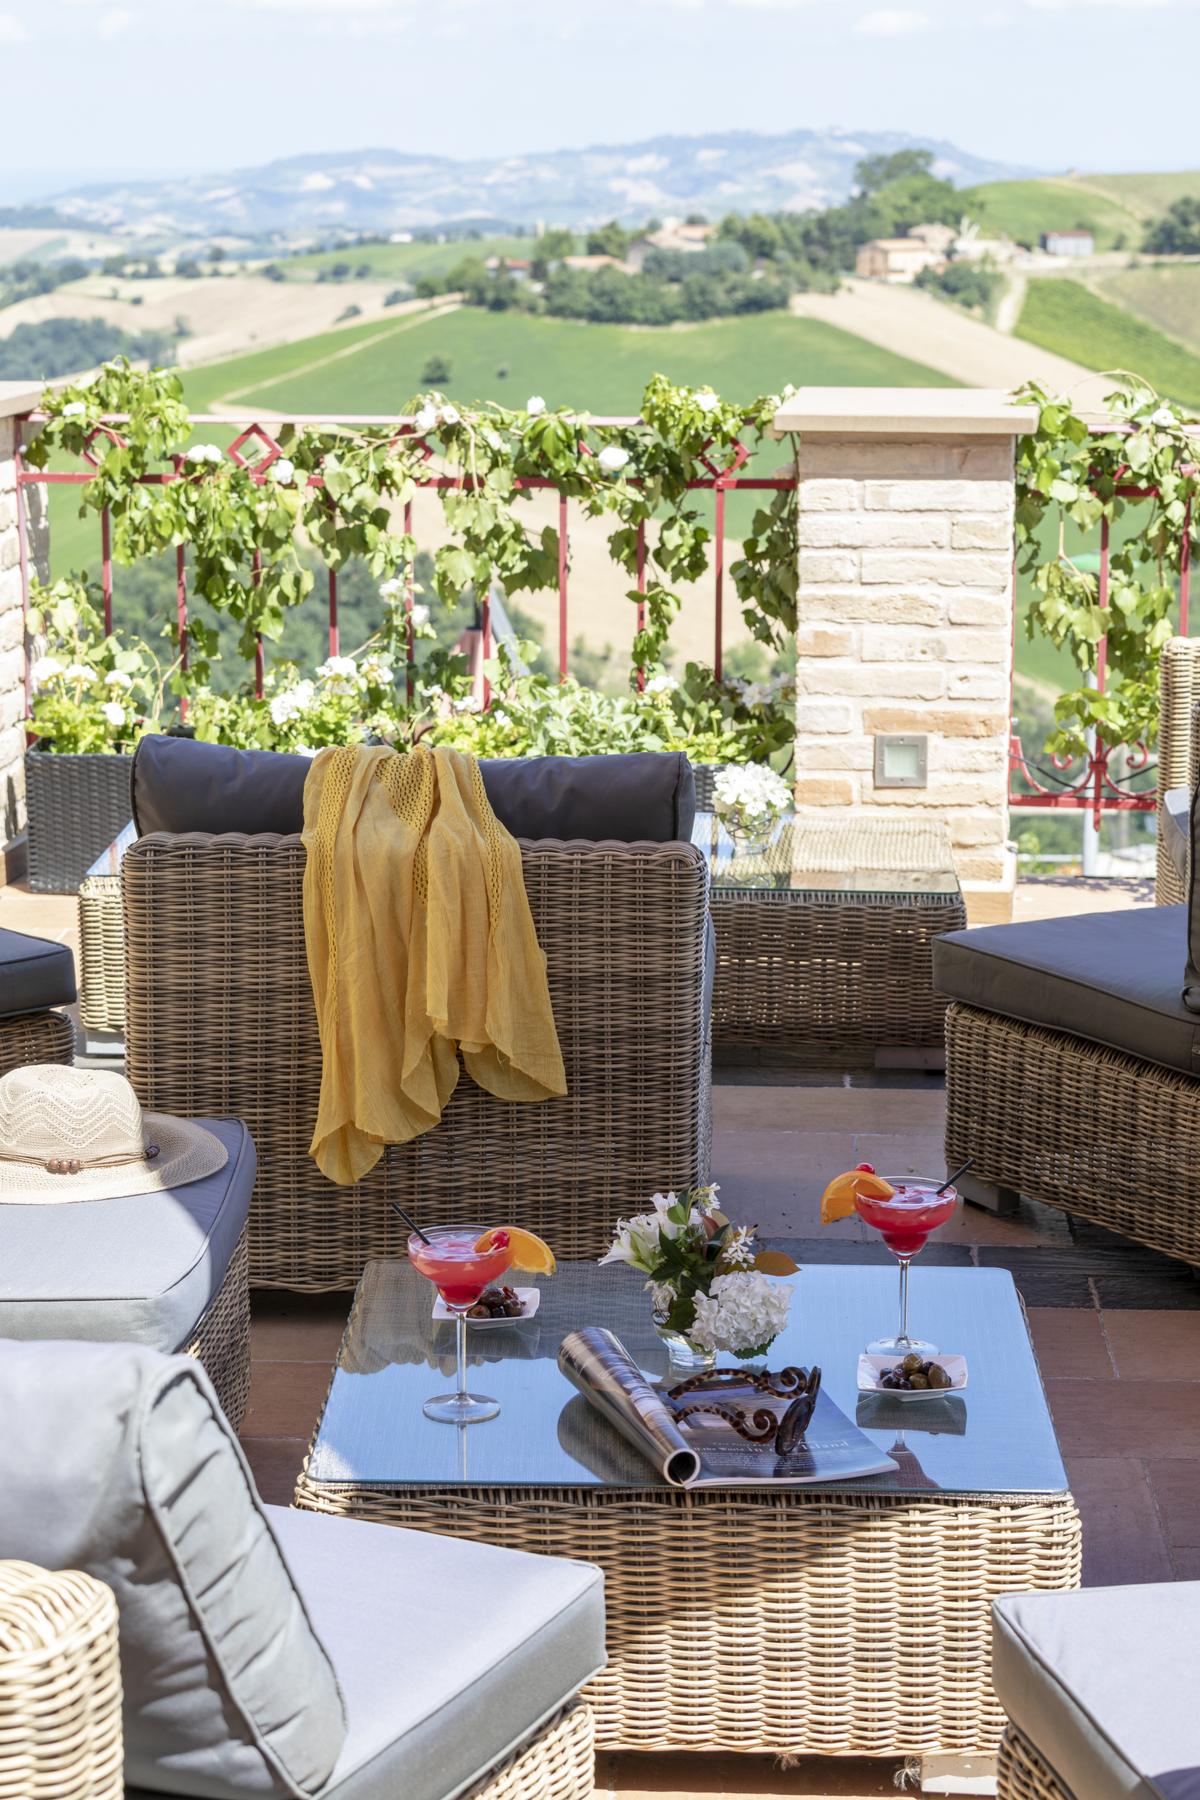 The terrace extending from Hotel Leone's bar affords breathtaking views of Le Marche's rolling green hills. (Courtesy of Hotel Leone)